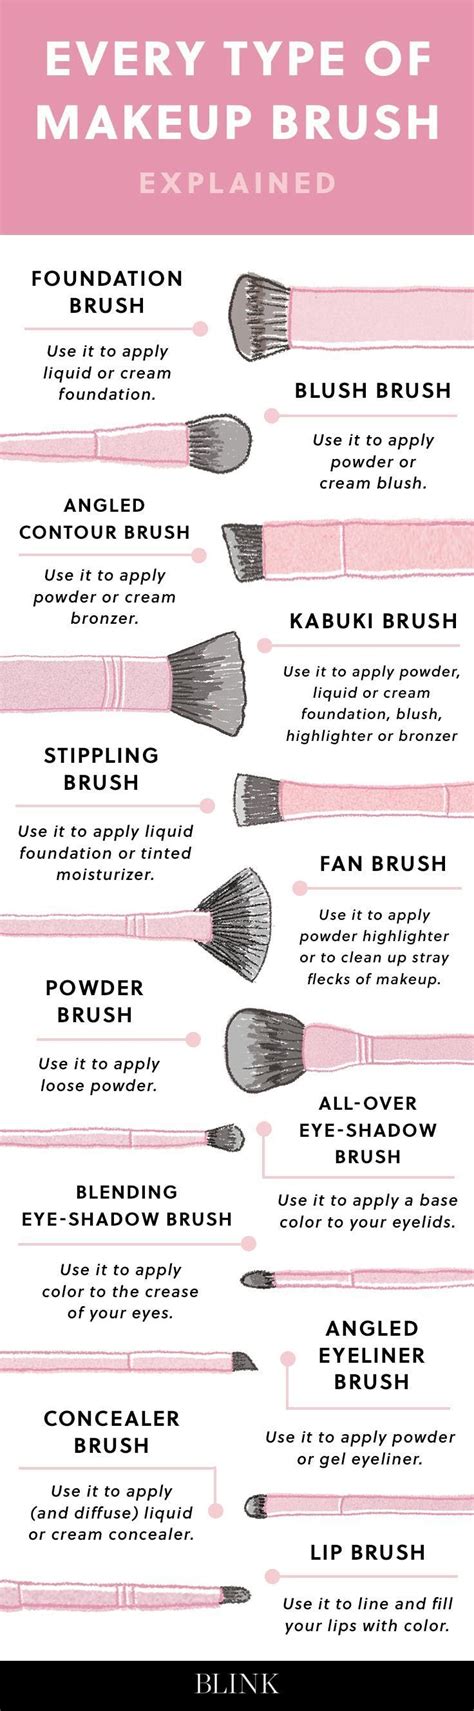 Every Type Of Makeup Brush Finally Explained Via Makeup Brushes